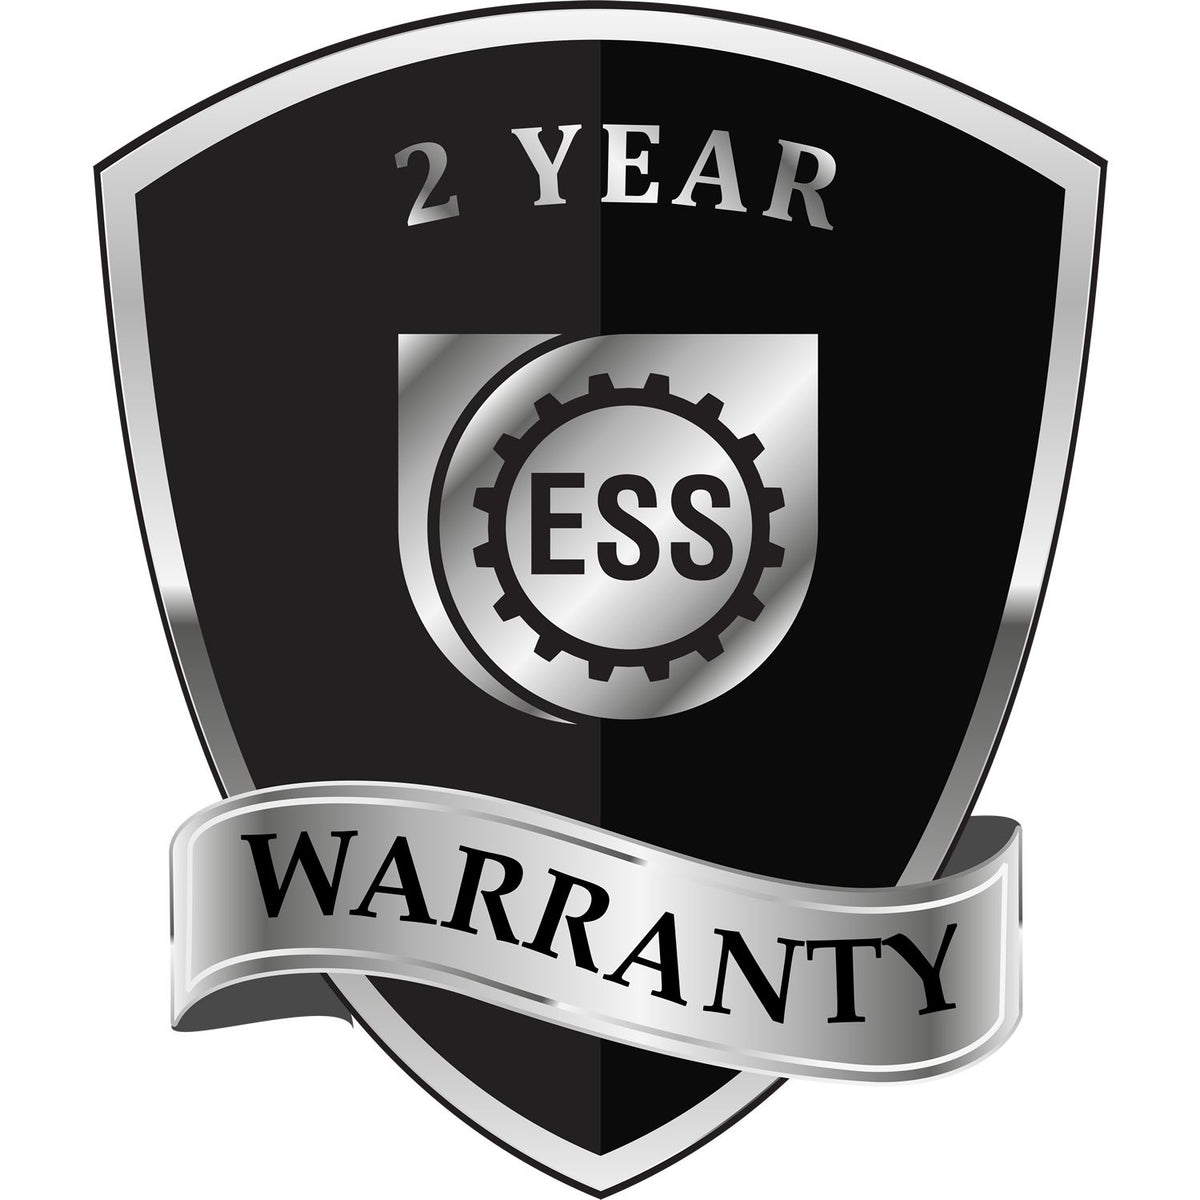 A black and silver badge or emblem showing warranty information for the Gift Iowa Engineer Seal